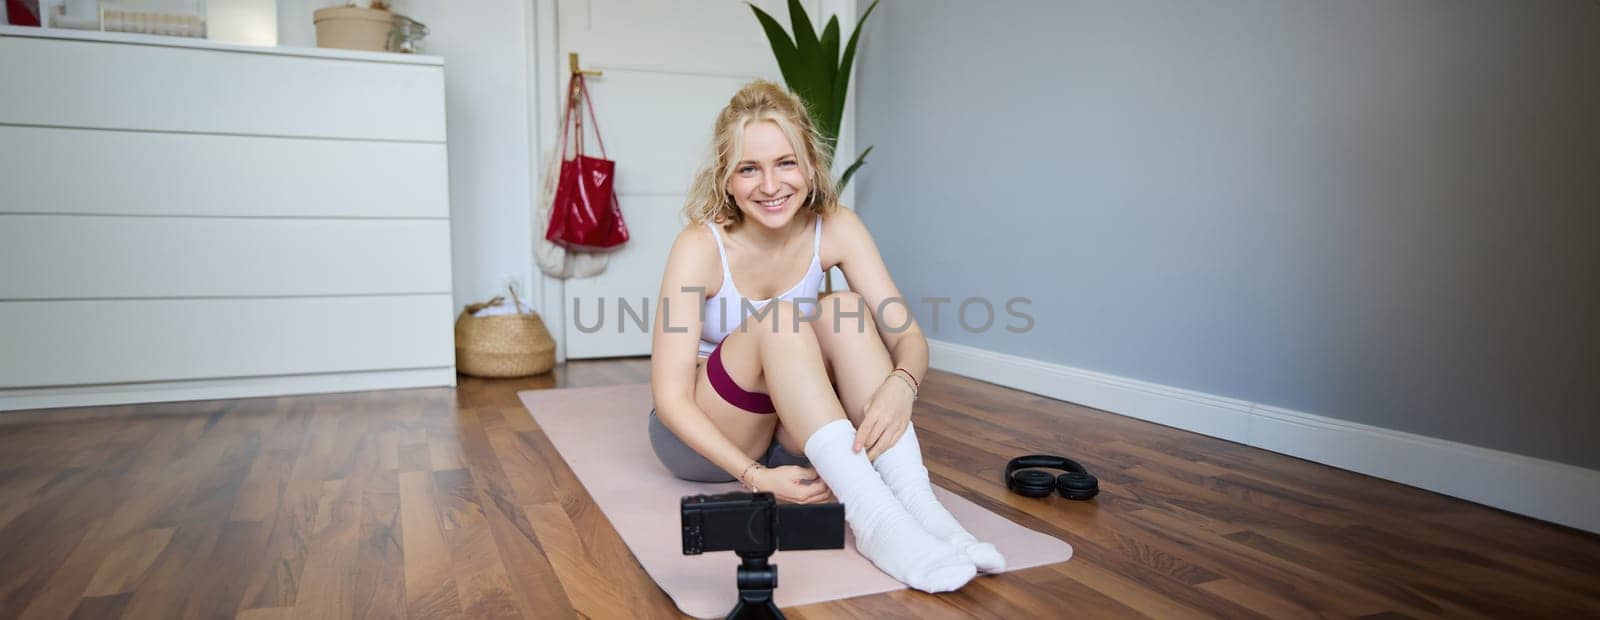 Portrait of young blond woman, social media vlogger using digital camera during workout, shooting video about exercises and fitness, stretching with rubber resistance band.